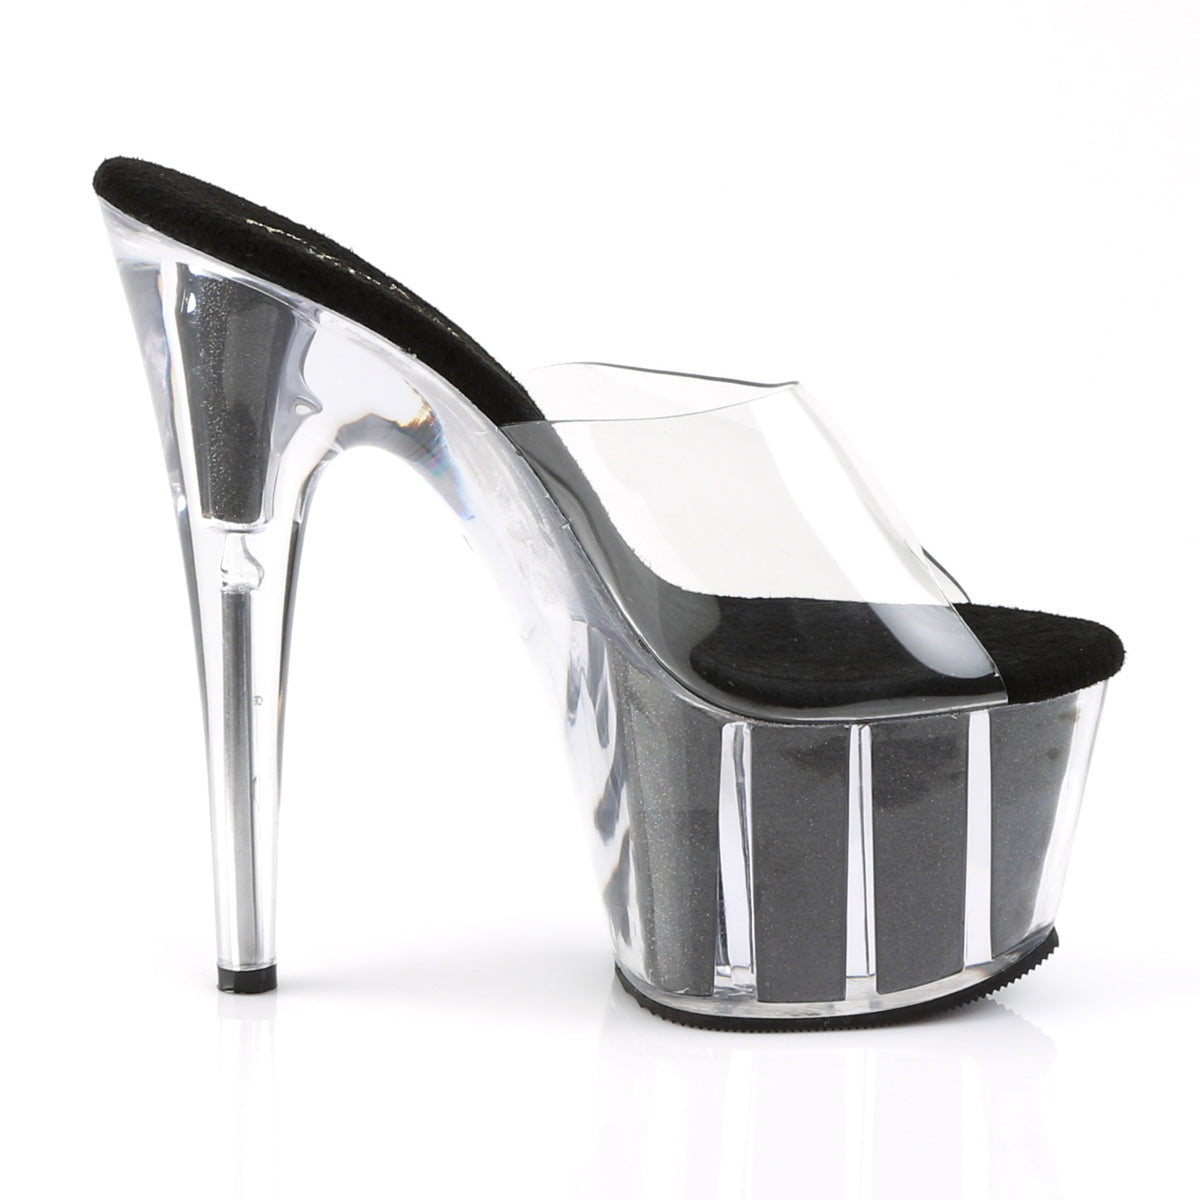 ADORE-701G / C / B 7 "PLEASER FAST DELIVERY 24-48h 